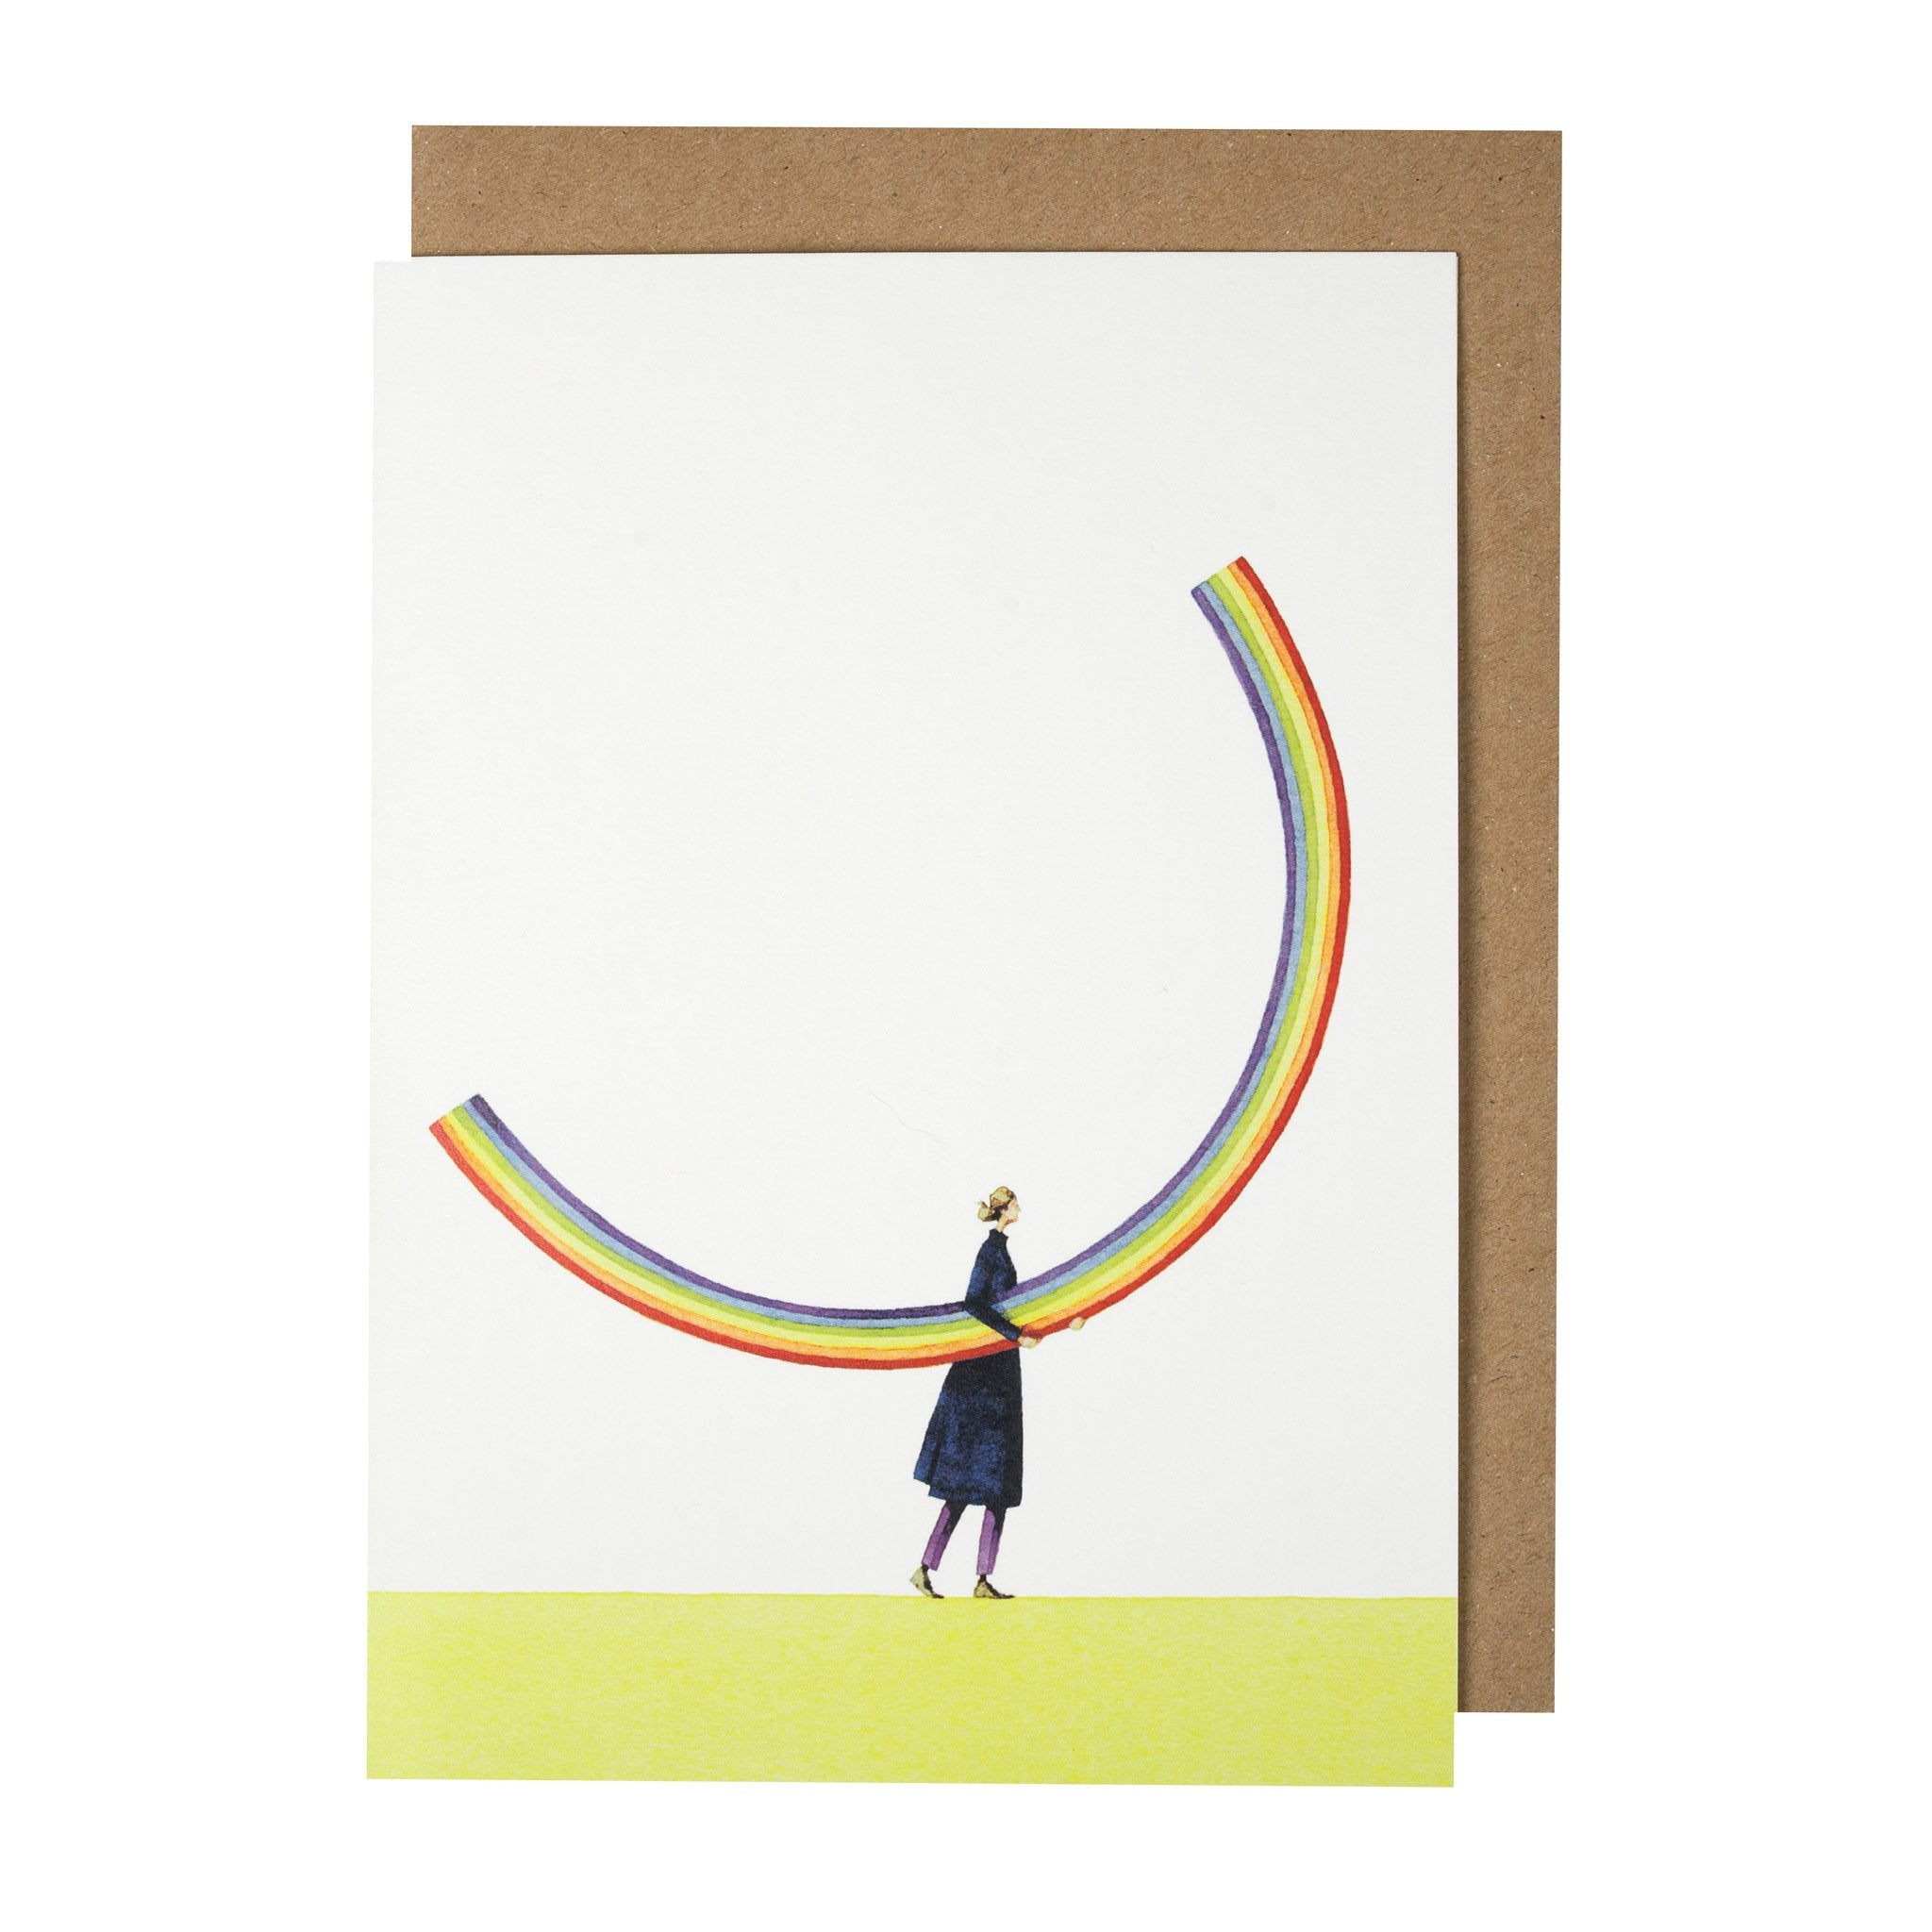 A Rainbow Girl Greeting Card by Hester &amp; Cook, featuring artwork of a woman standing in front of a rainbow, designed to be environmentally sustainable.